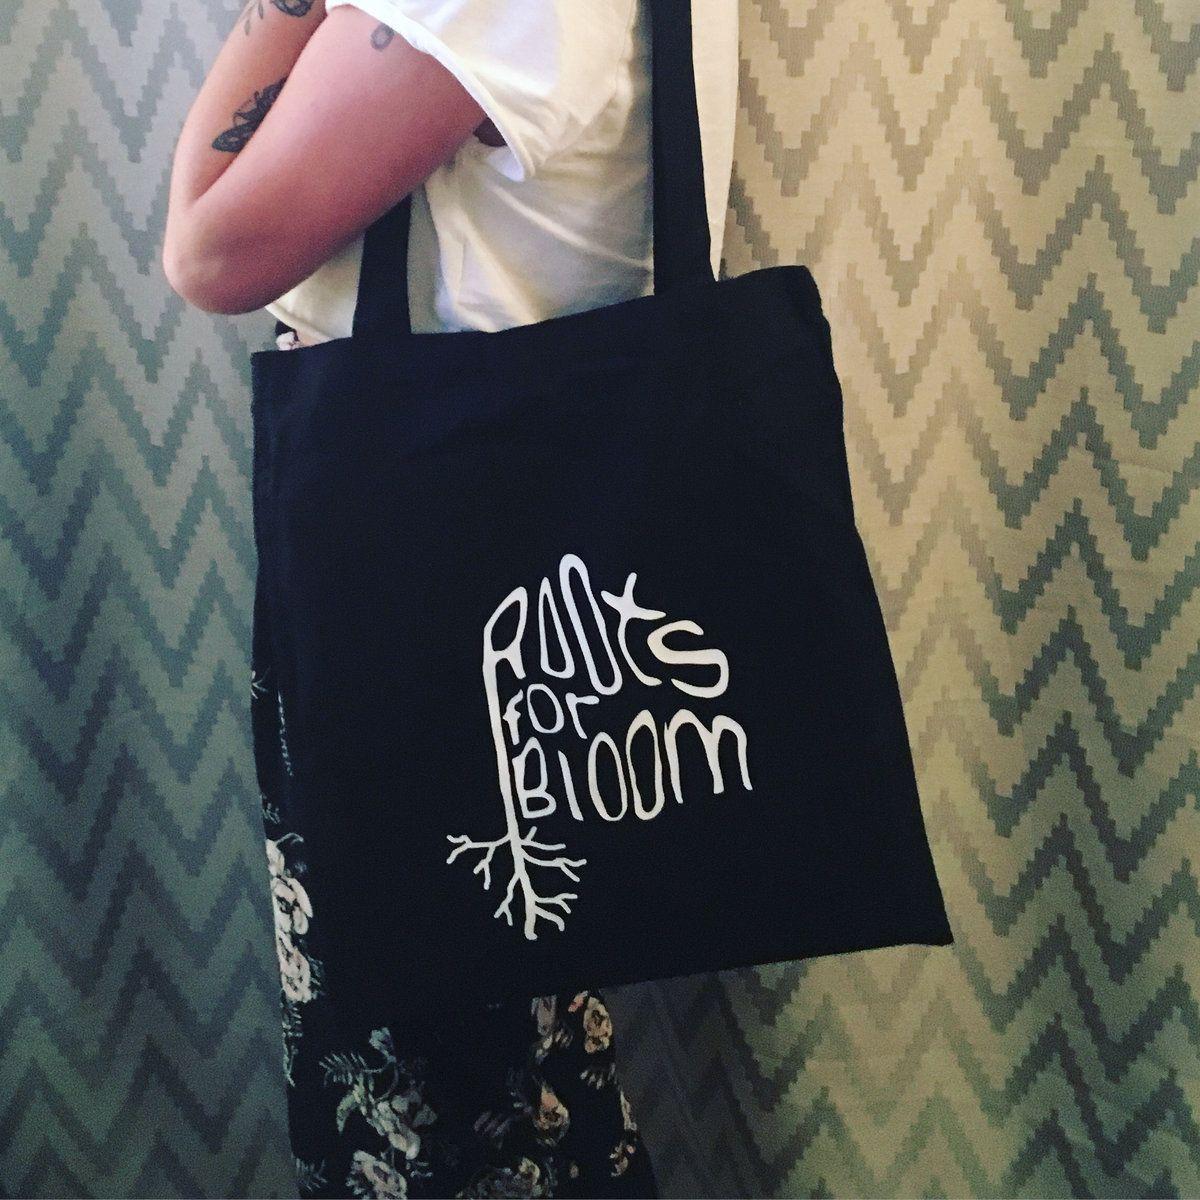 Red Roots Logo - Red Tote Bag w. Roots For Bloom Logo. Roots For Bloom